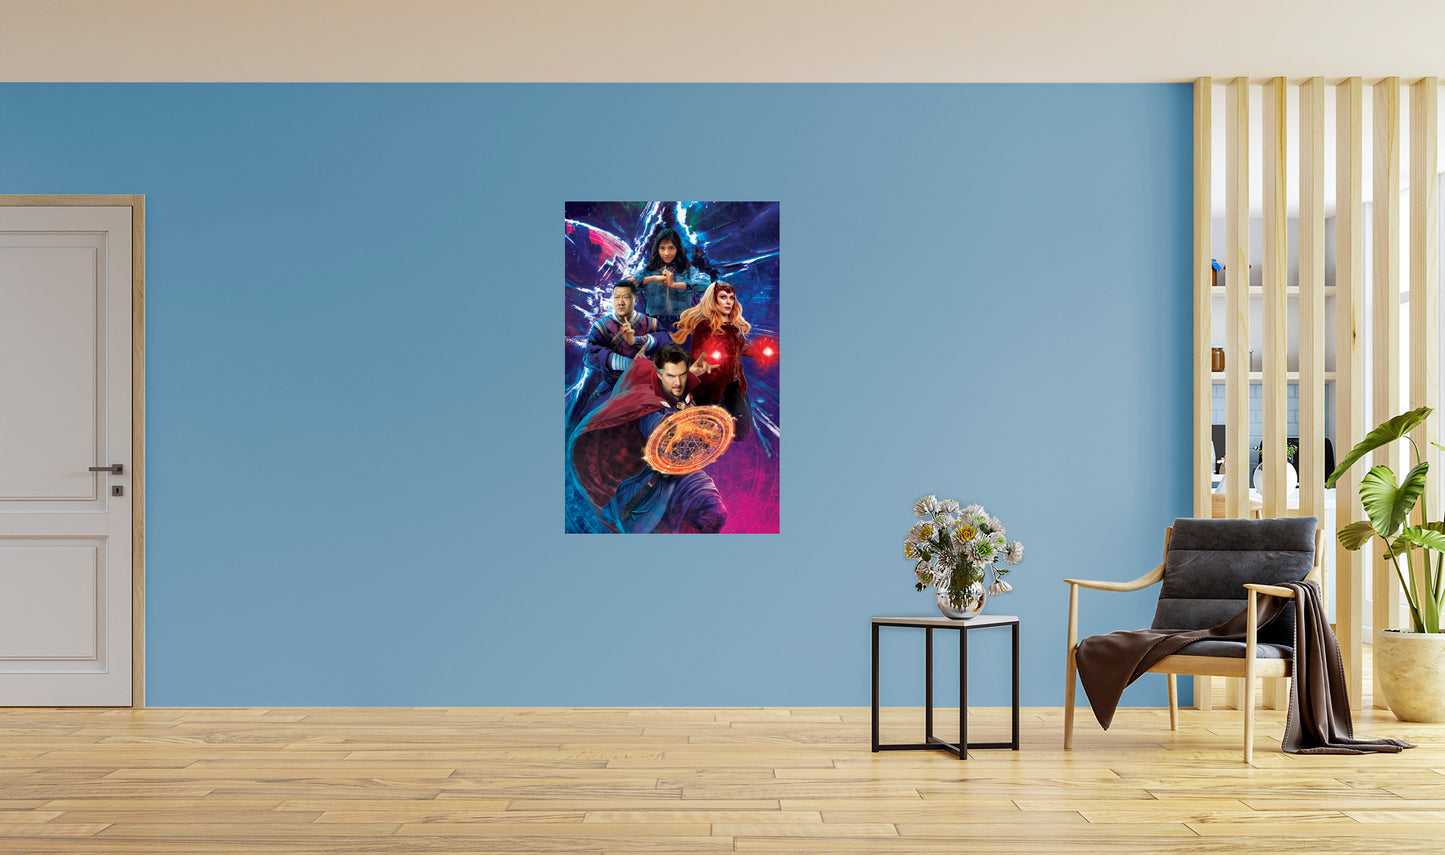 Doctor Strange 2: In the Multiverse of Madness: Astral Group Poster - Officially Licensed Marvel Removable Adhesive Decal